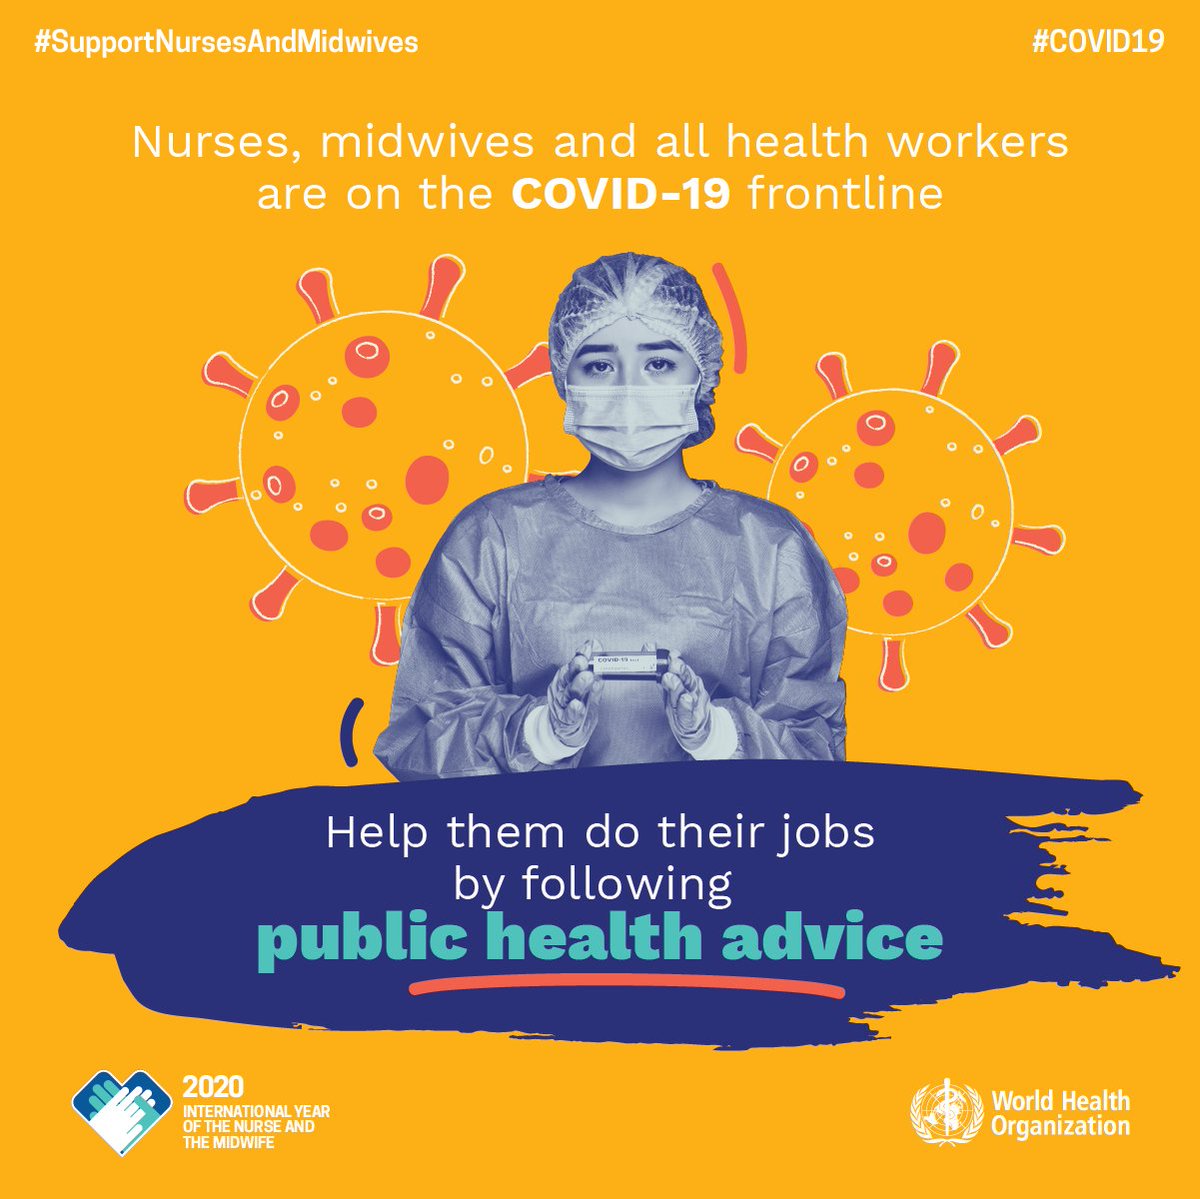 Nurses are at the frontline of battling pandemics like  #COVID19.On  #WorldHealthDay   and every day, let’s show our gratitude by doing our part and following public health advice from WHO and national health authorities:  http://who.int/COVID-19  #SupportNursesAndMidwives